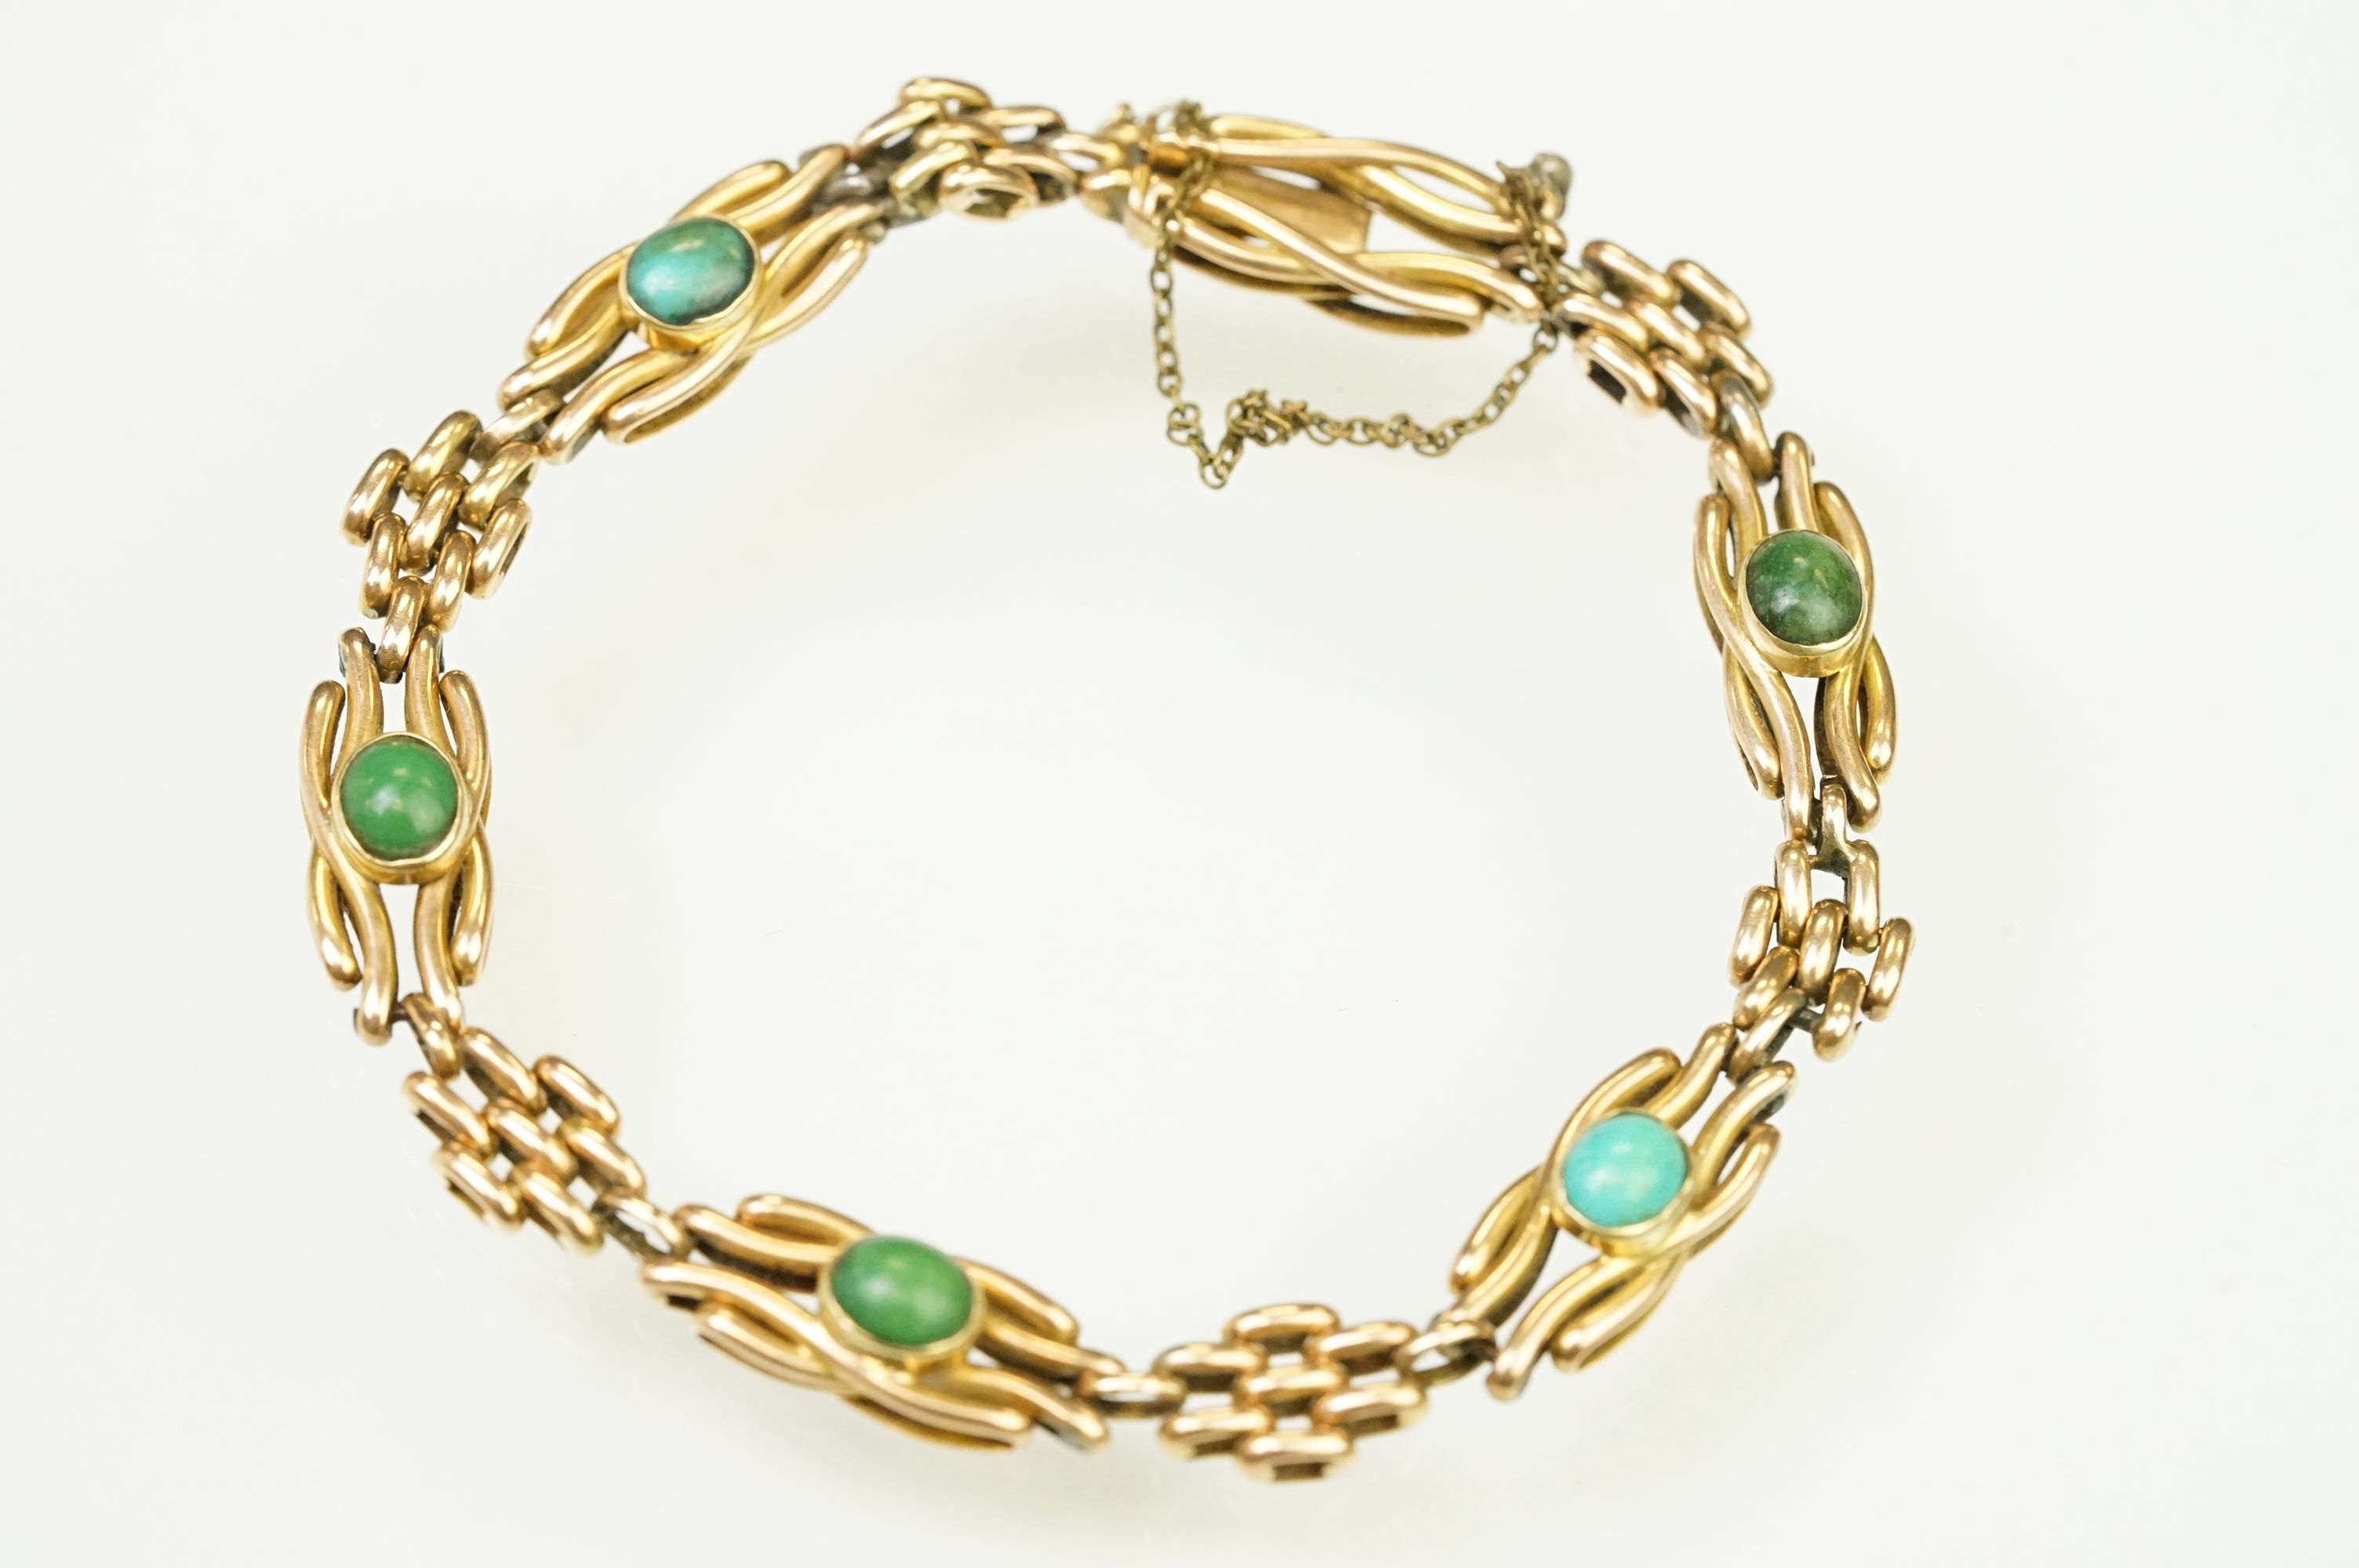 15ct gold and turquoise gate link bracelet. The bracelet being beze set with five oval turquoise